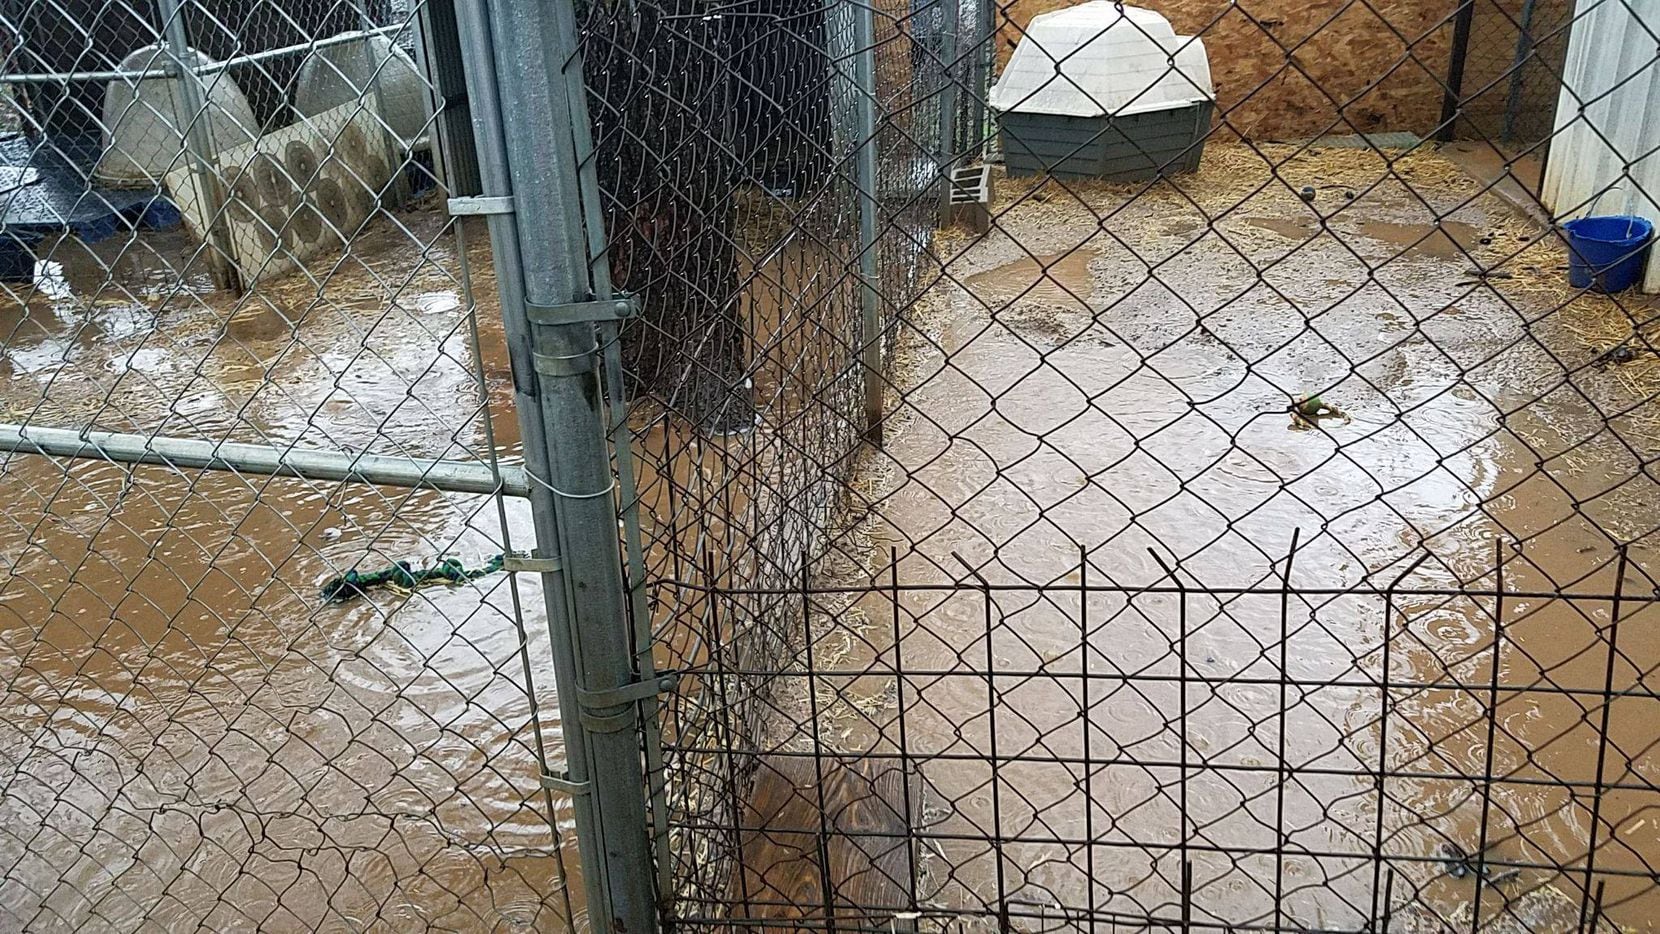 Texas animal shelter asks for help after heavy rain floods kennels